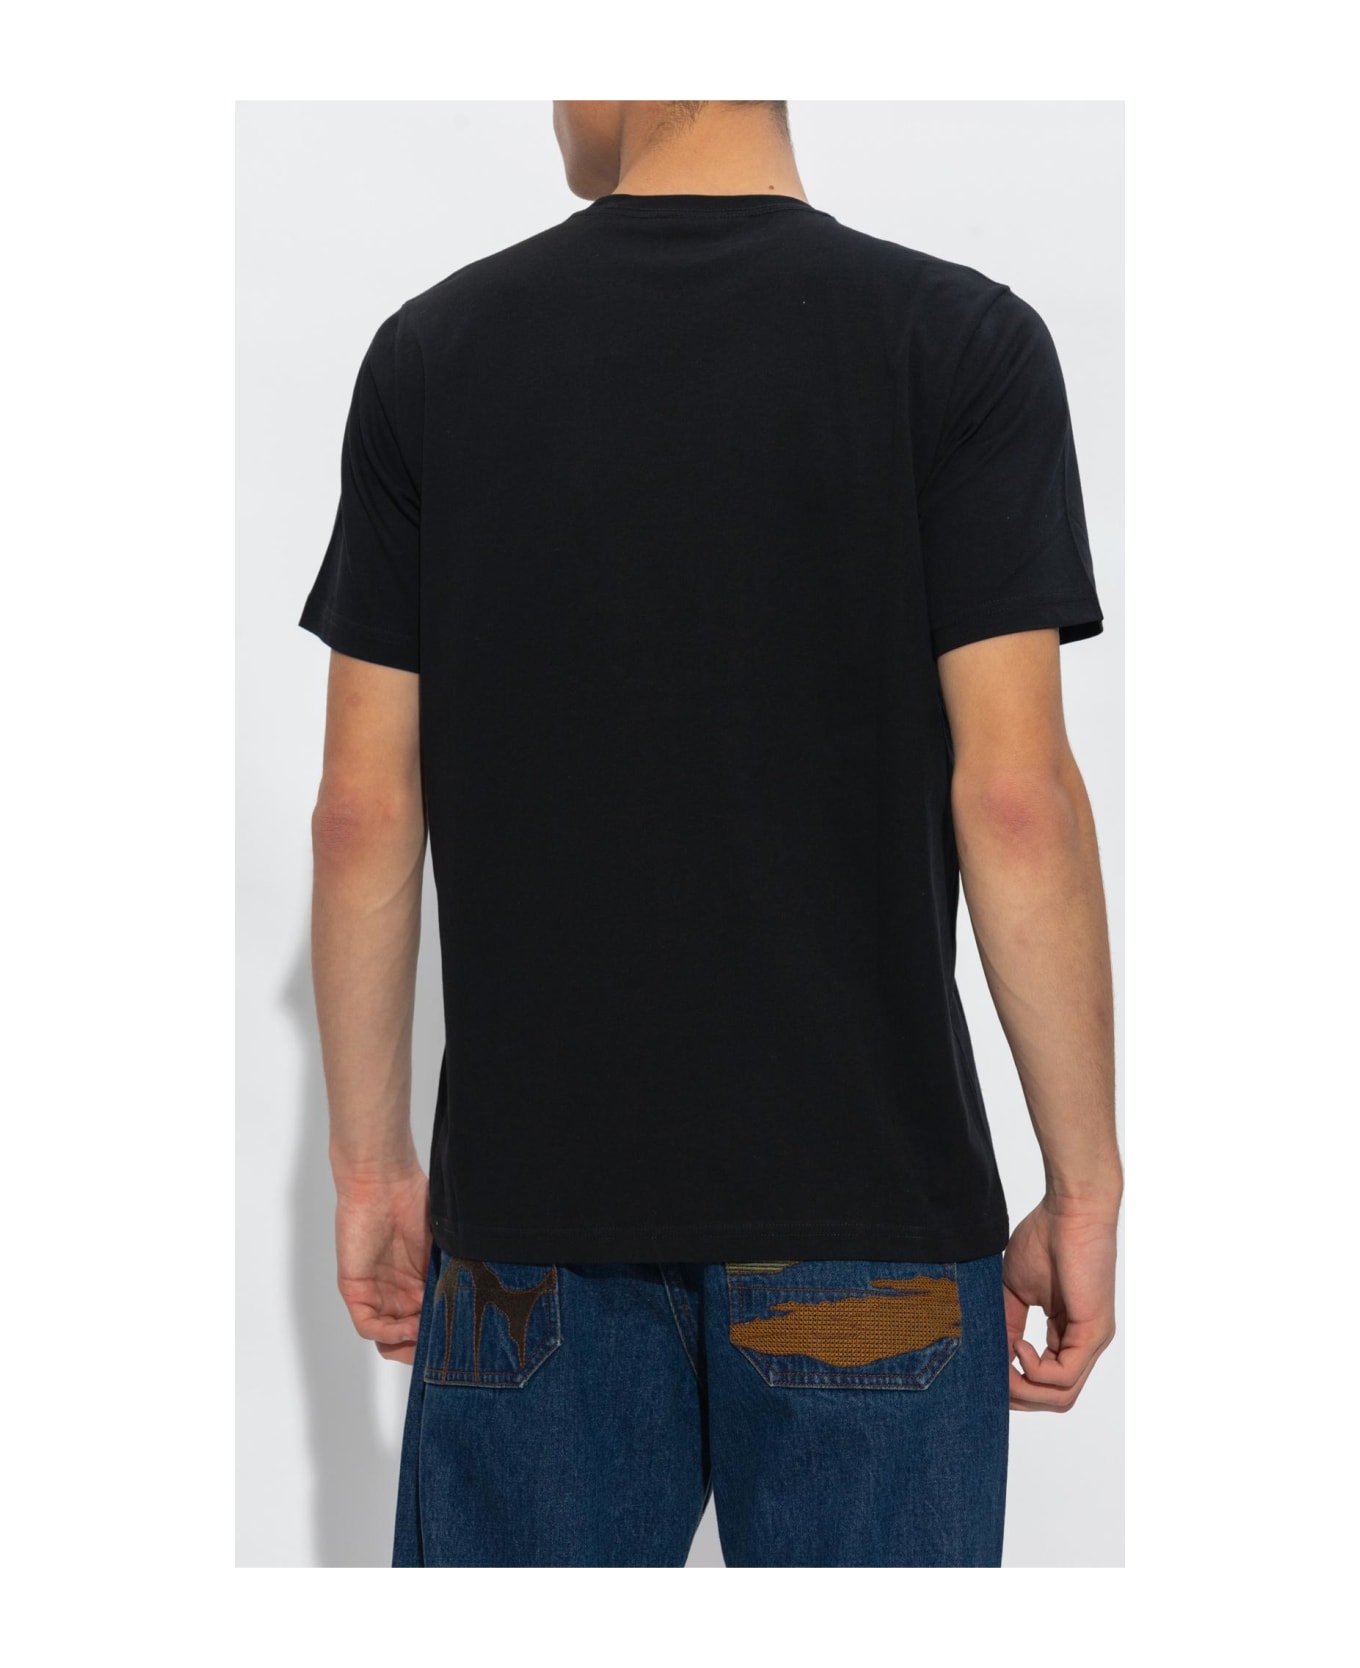 PS by Paul Smith Ps Paul Smith Printed T-shirt - Black シャツ